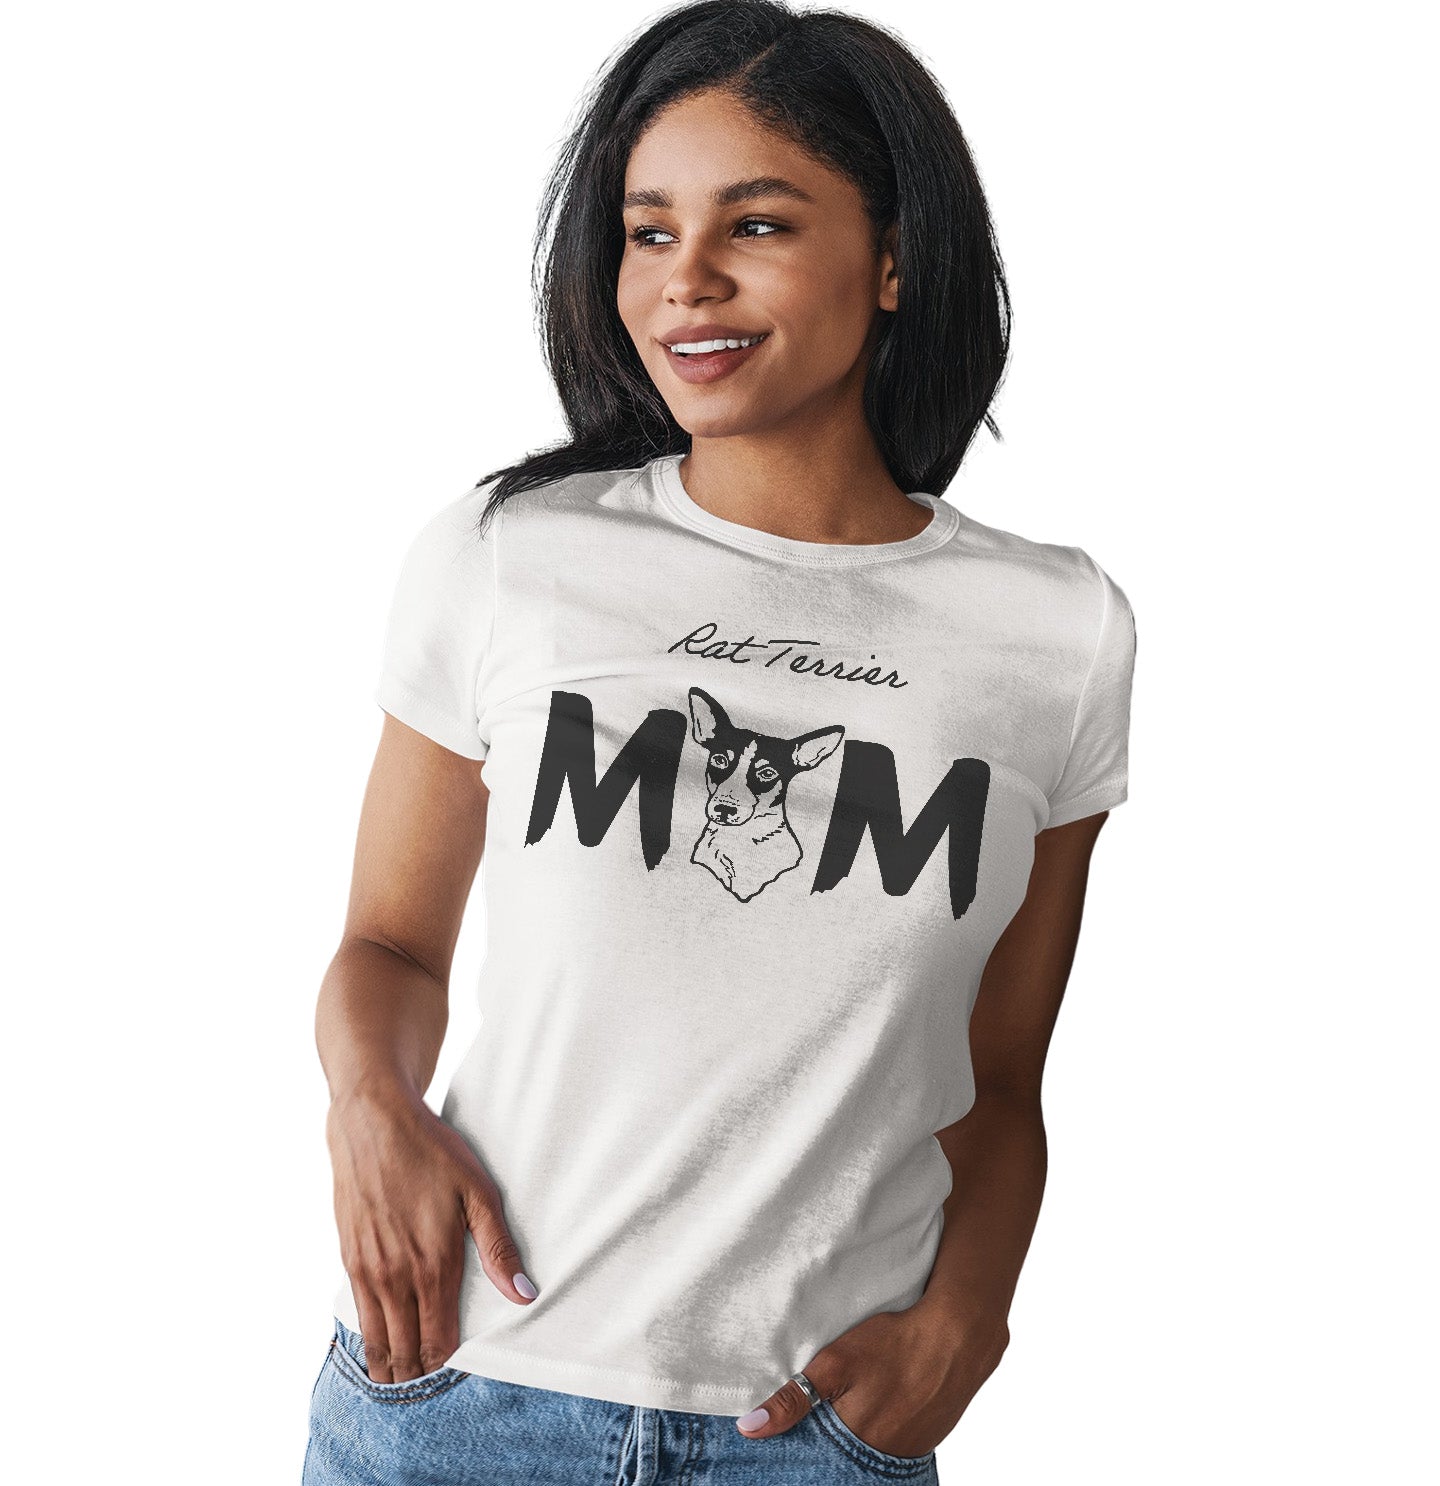 Rat Terrier Breed Mom - Women's Fitted T-Shirt